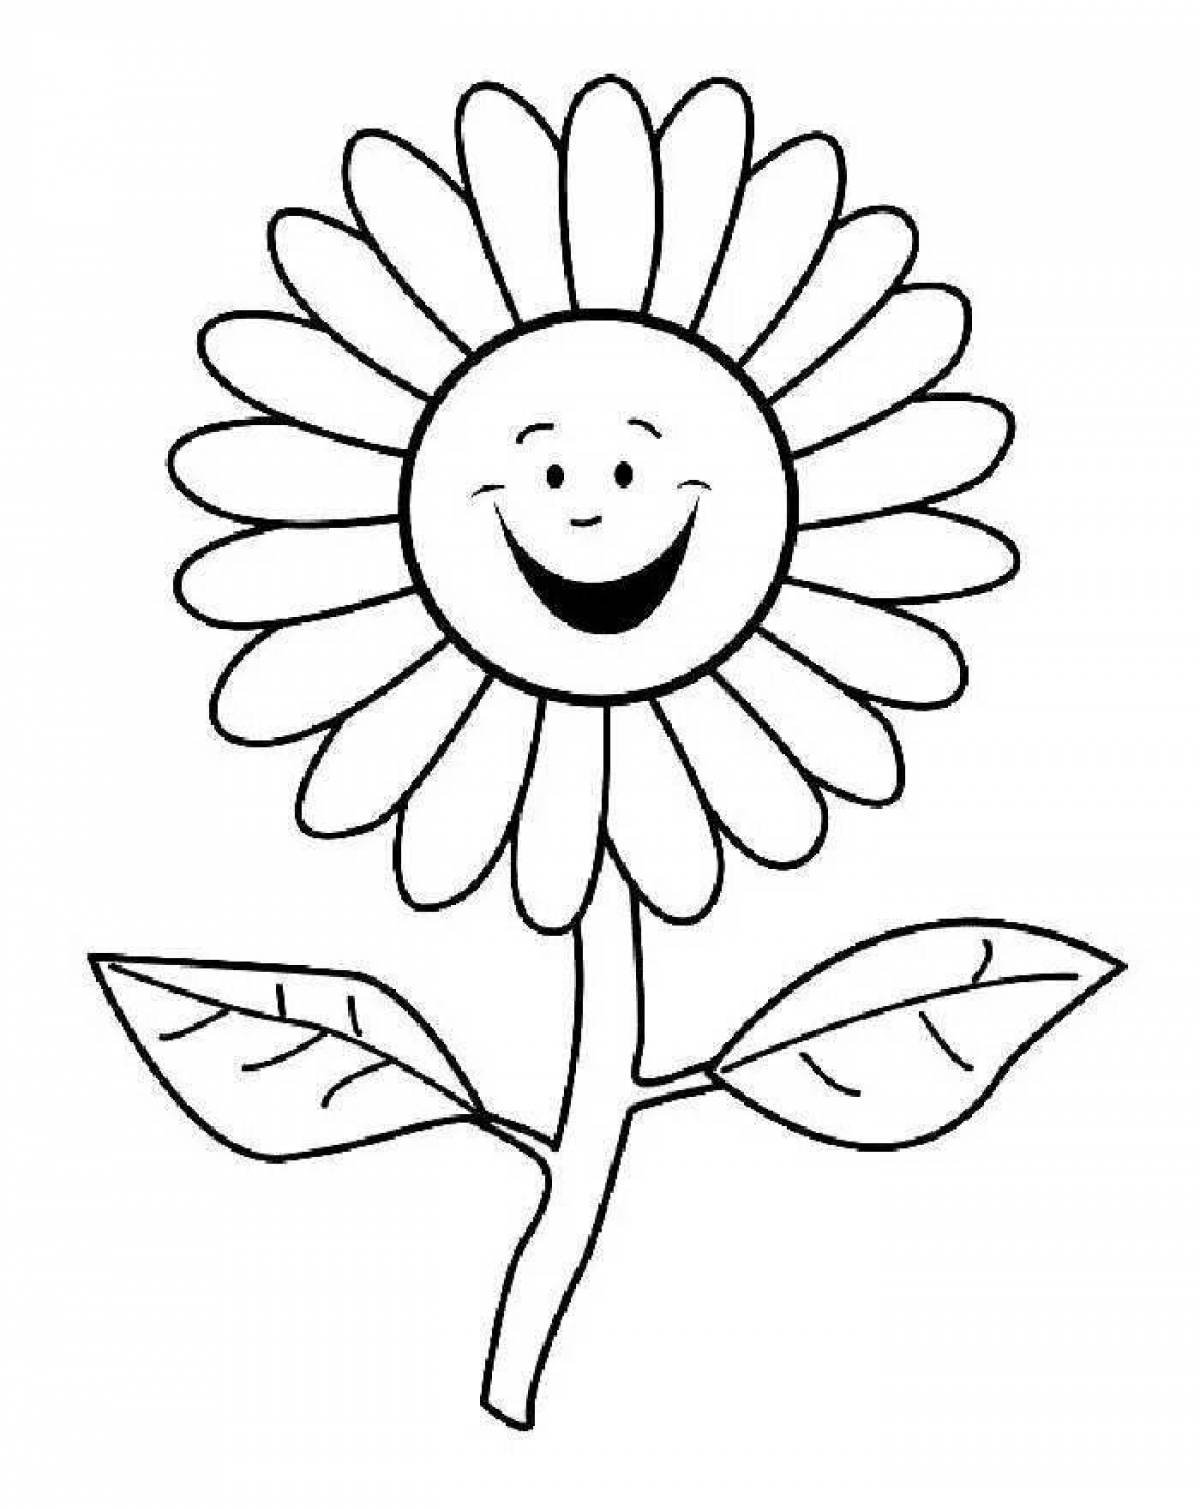 Colouring sunny chamomile flower